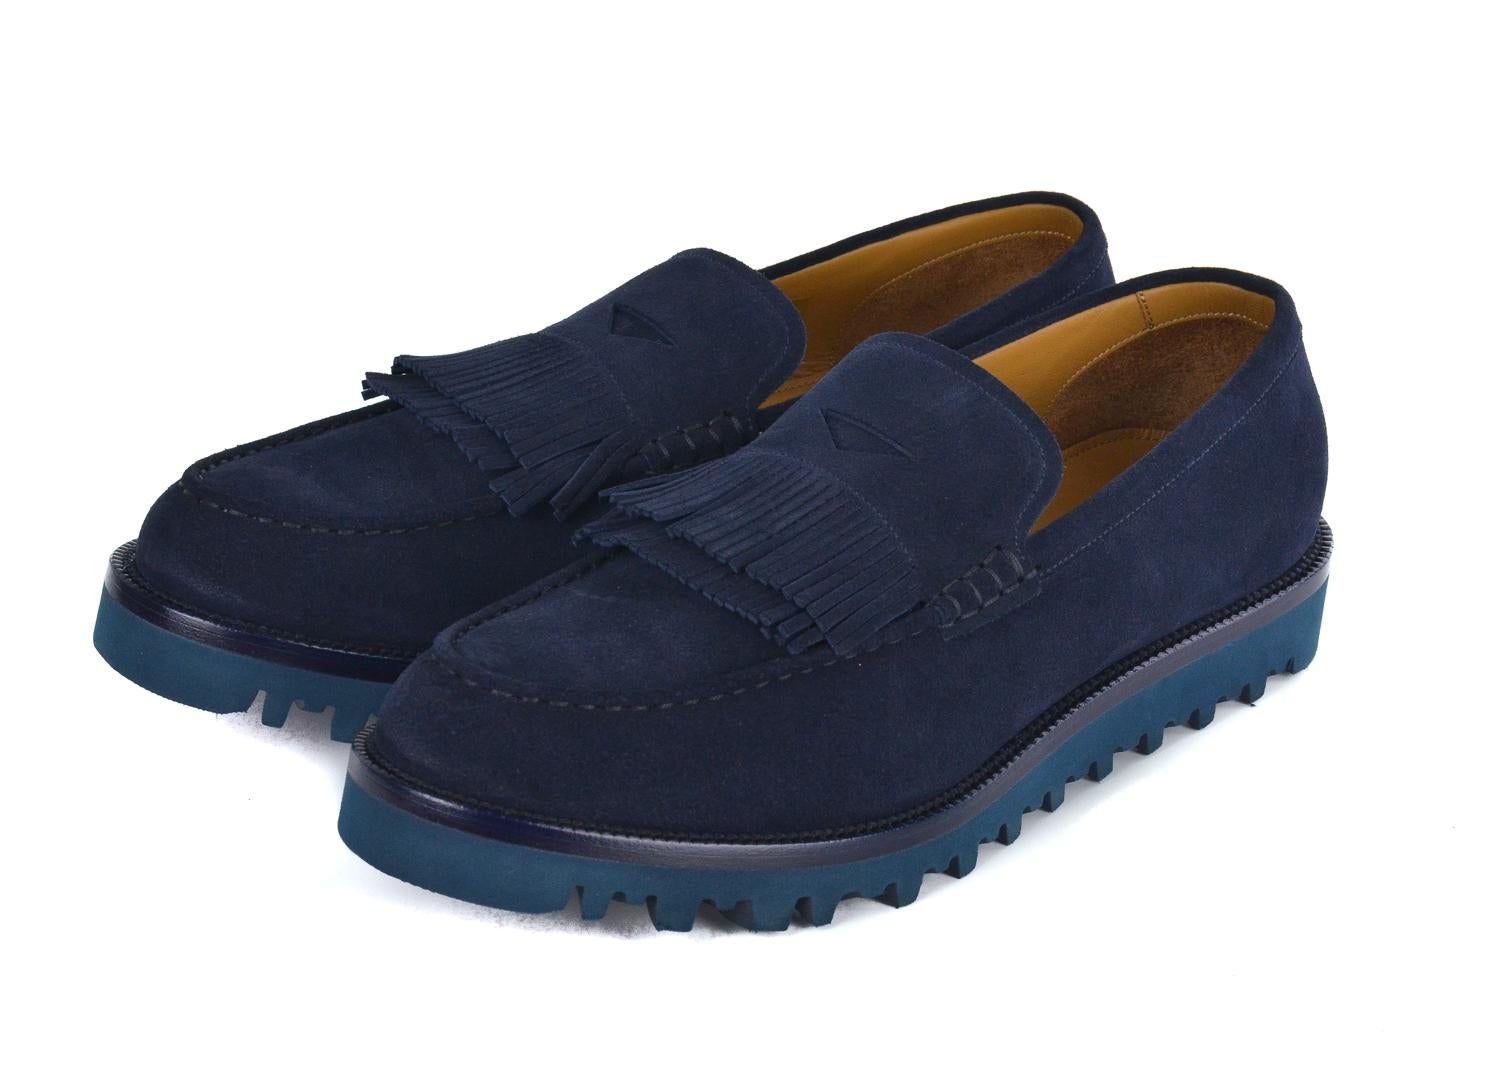 Calmly slip into your regal classics when in your Giorgio Armani Loafers. Known for blending refinement with modern edge Armani's combination of Navy suede, dapper fringing, and modern teal sole will provide the sophistication you need, Add to your